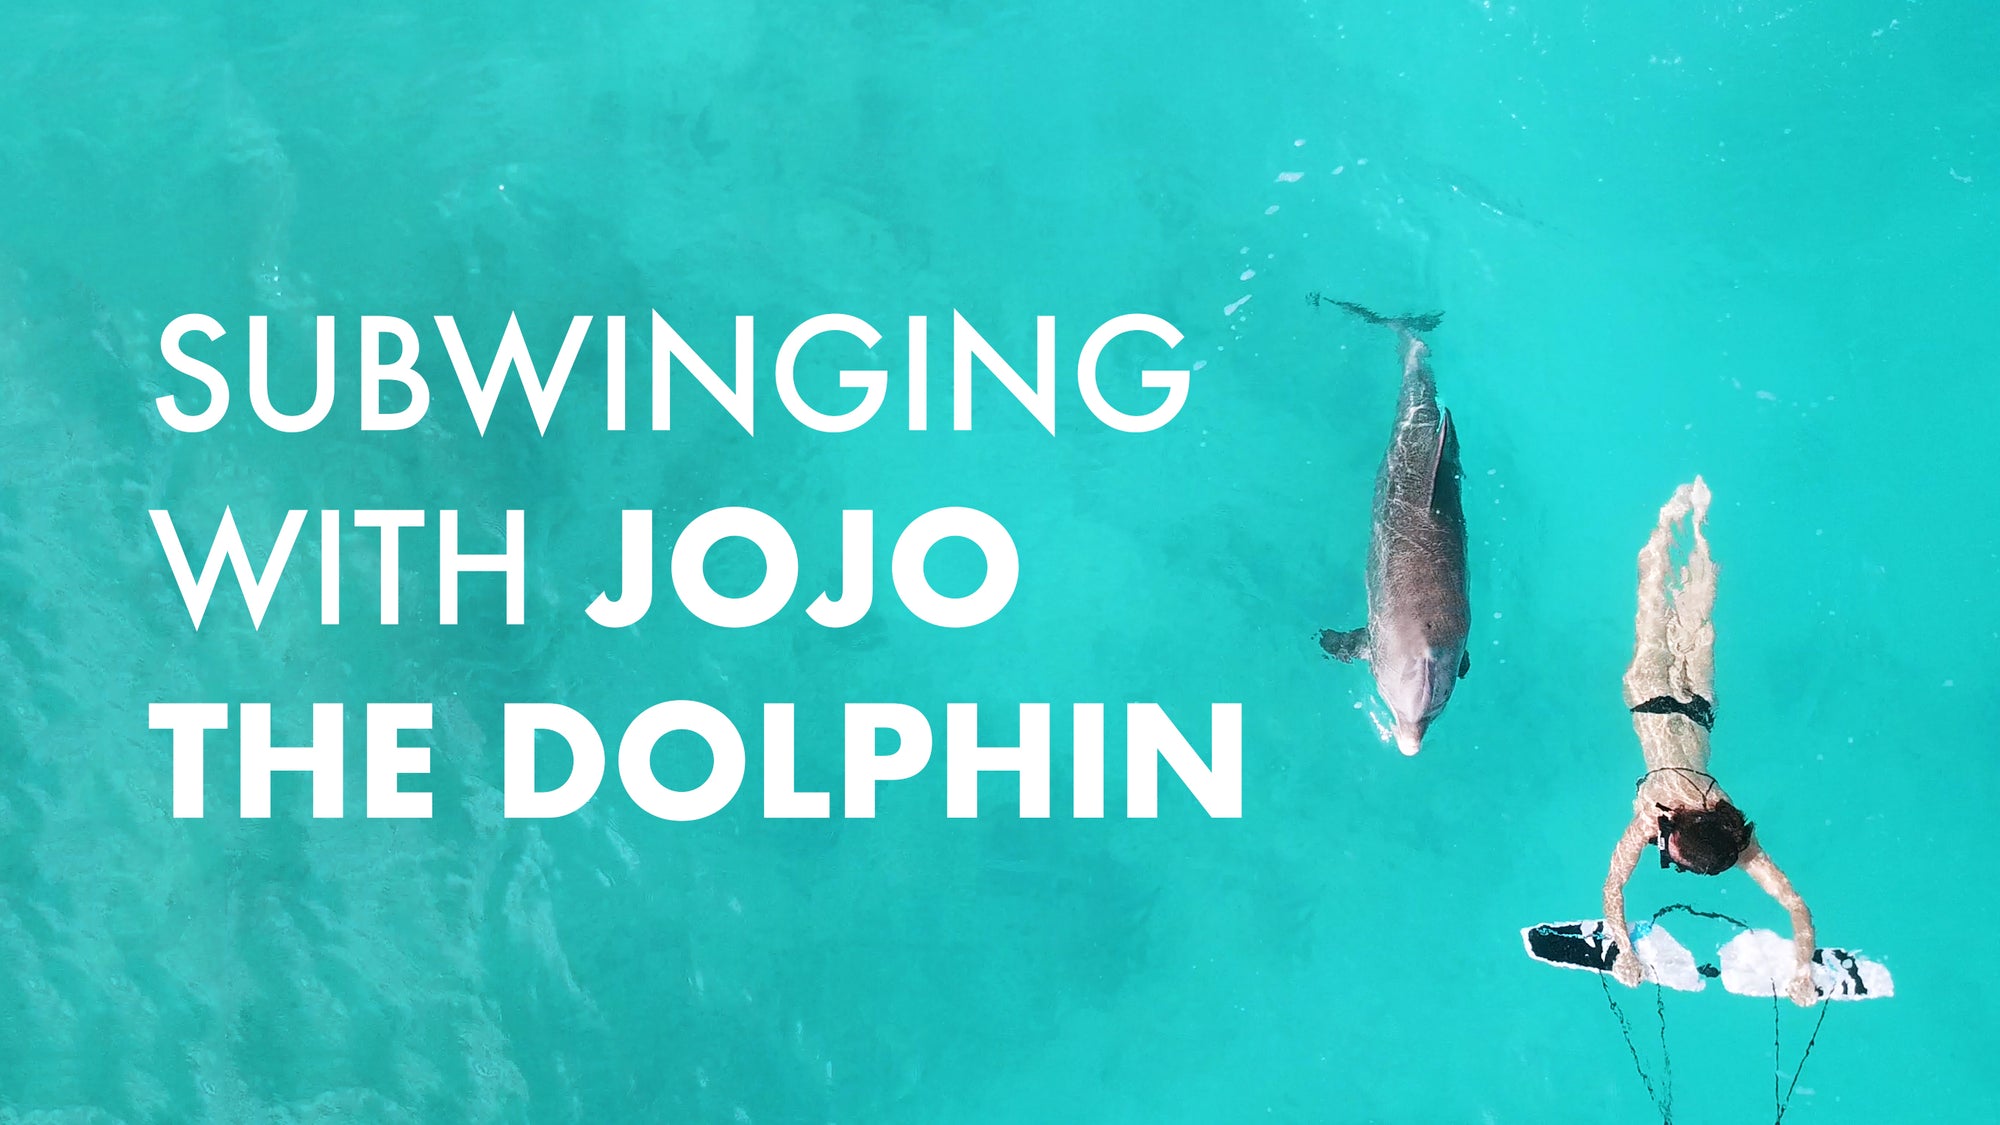 Subwinging with Jojo the dolphin